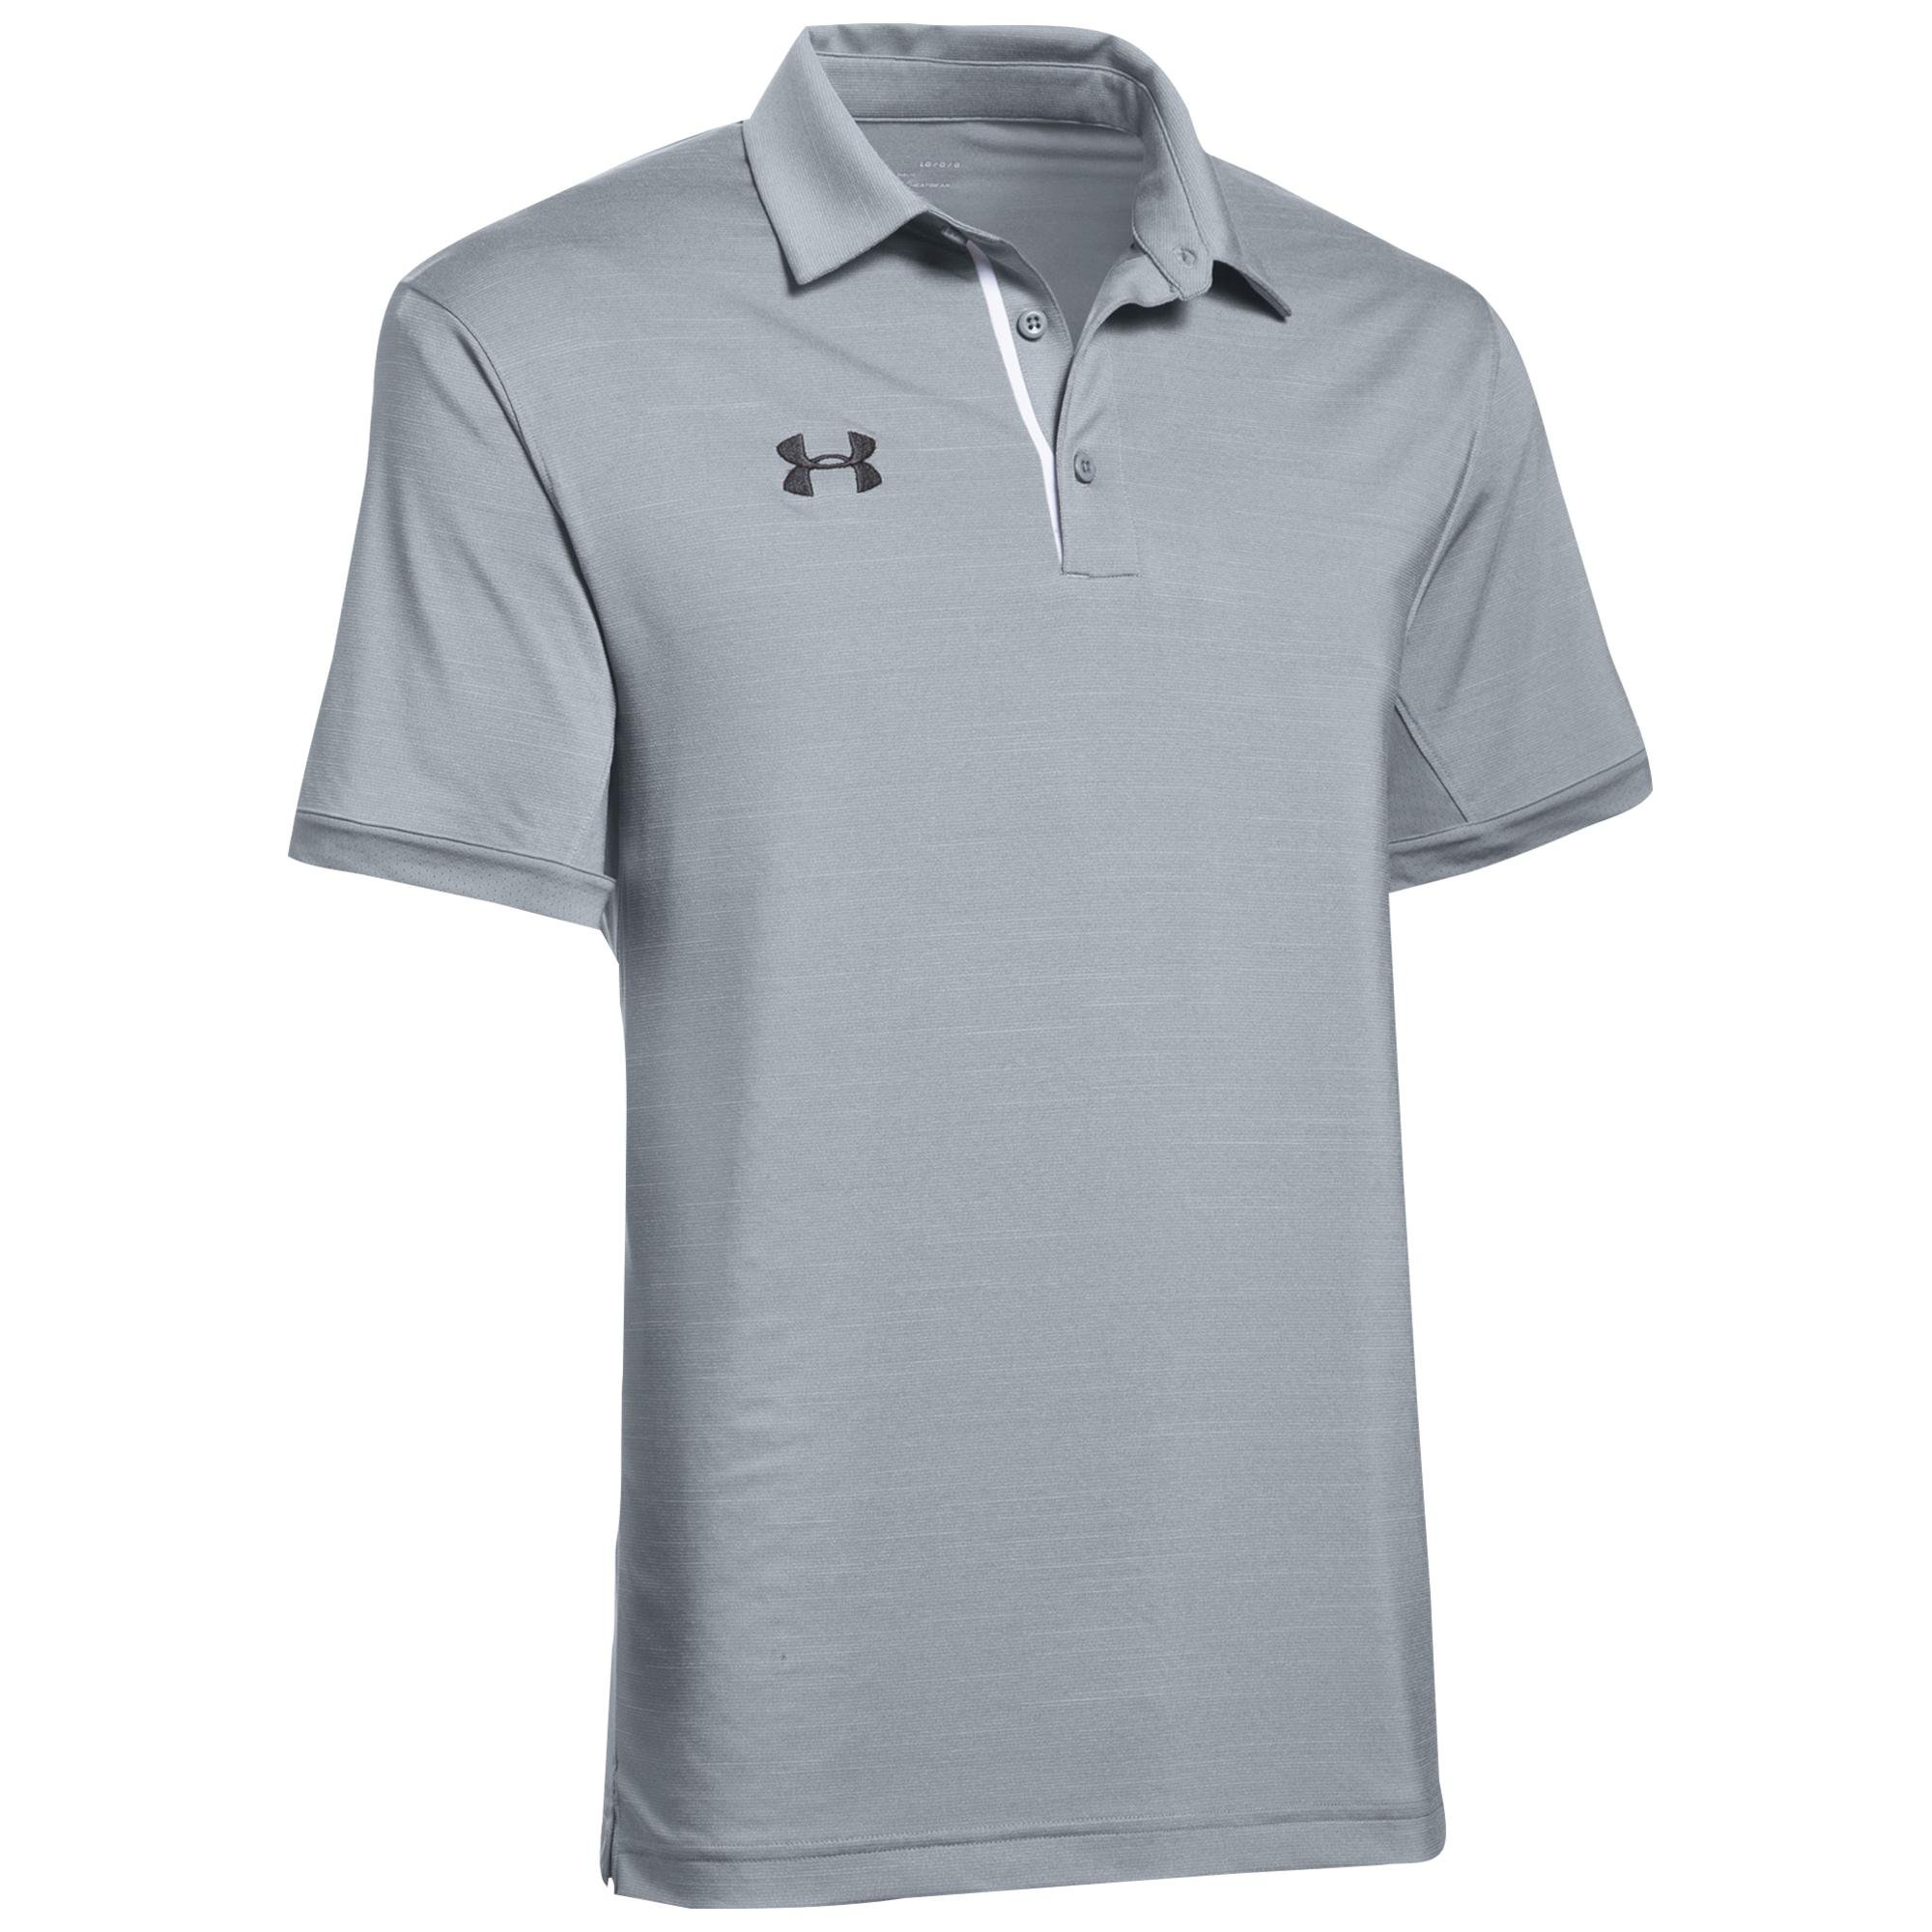 Under Armour Team Elevated Polo Shirt in Gray for Men - Lyst